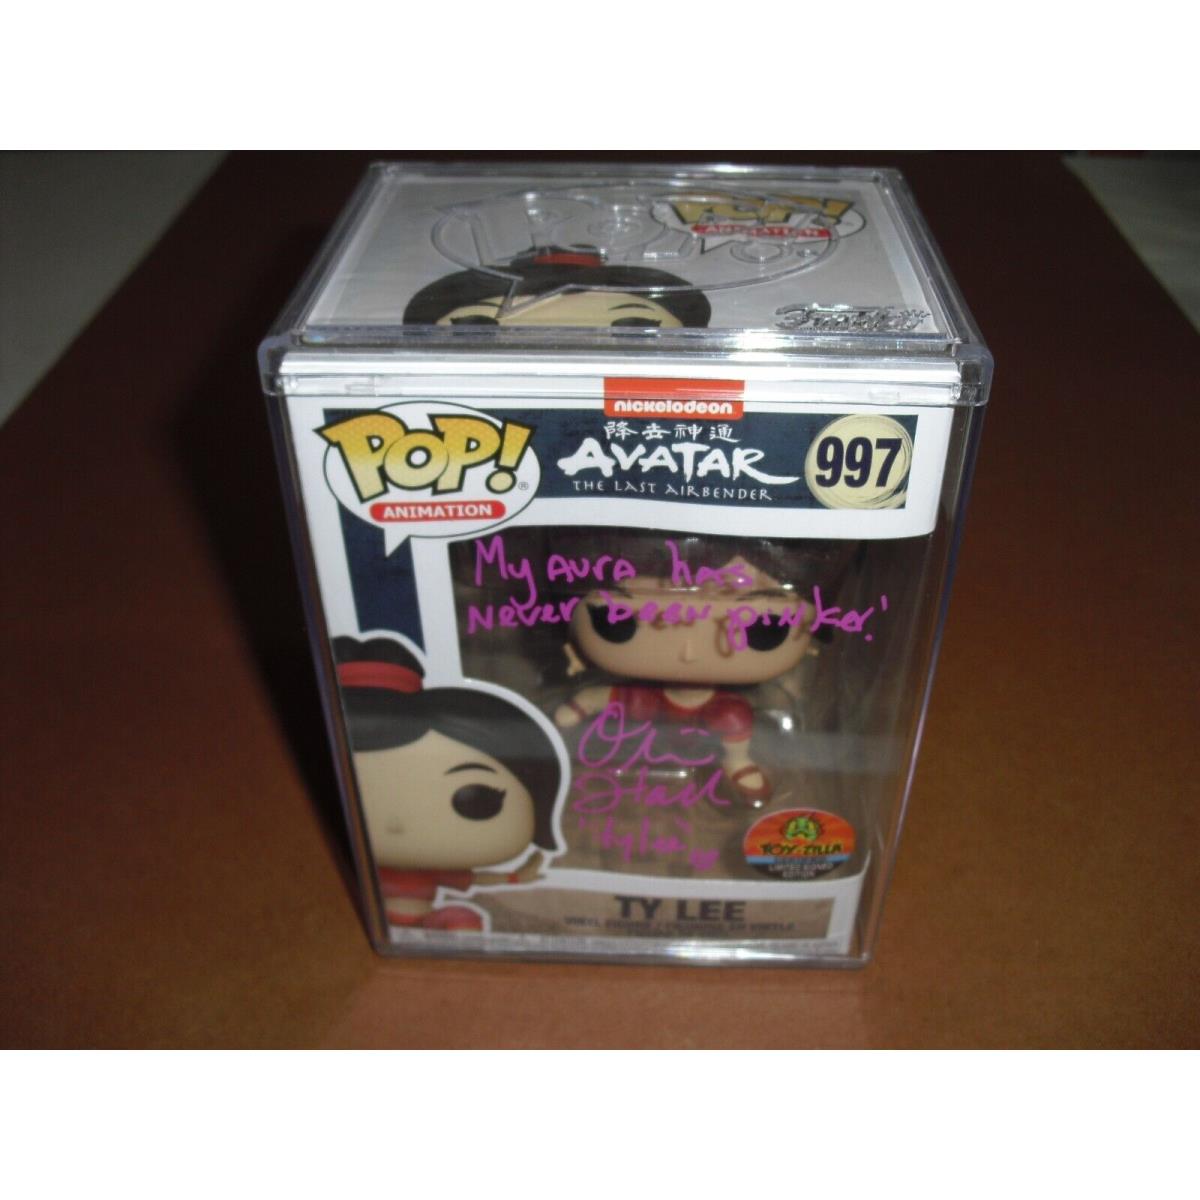 Ty Lee 997 Funko Pop Toy-zilla Certified Avatar Signed Remarked 9.5 Out of 10